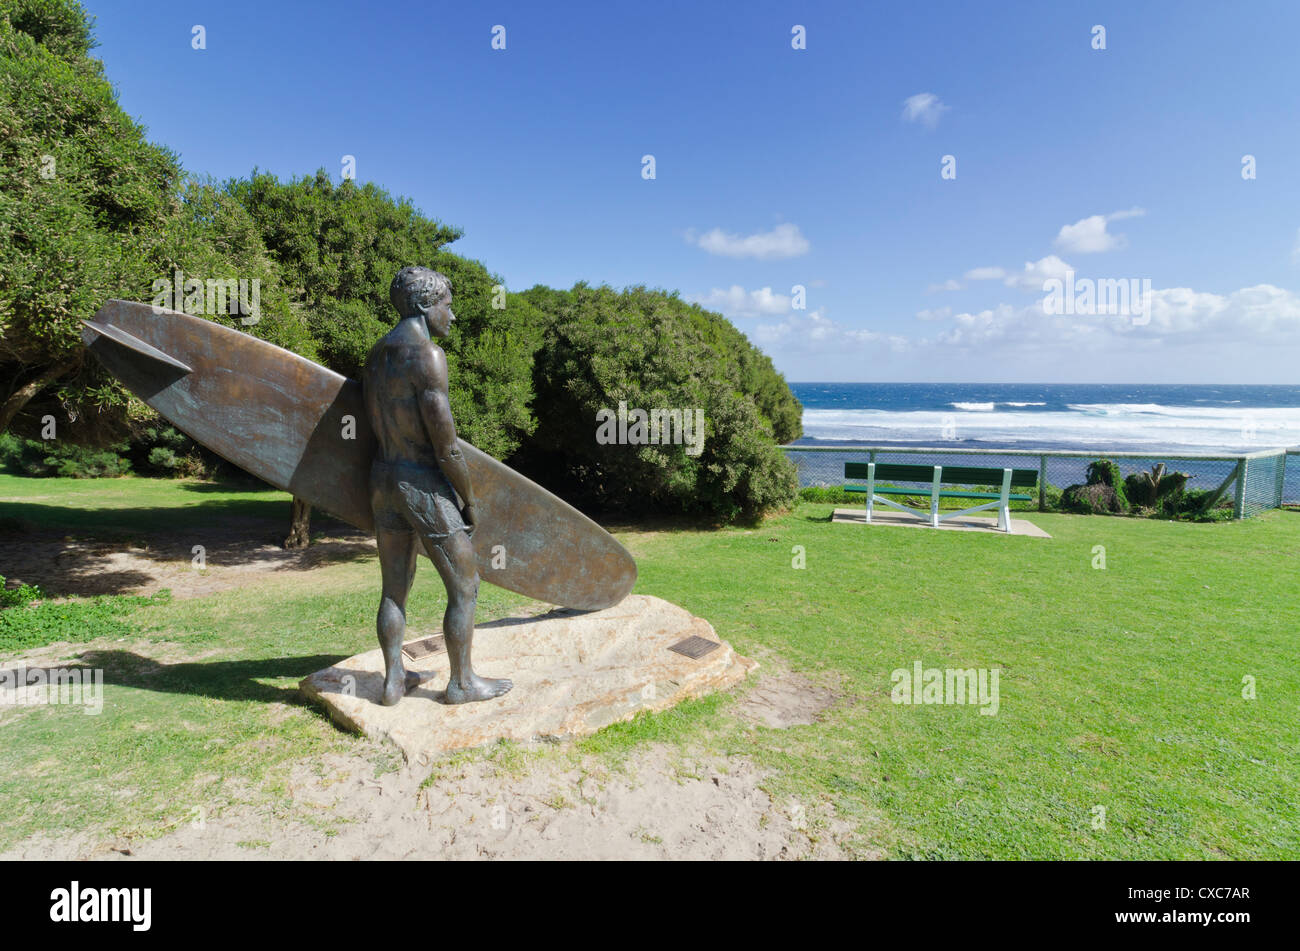 Park overlooking the sea with a surfer sculpture celebrating the history of surfing, Yallingup Beach, Western Australia Stock Photo